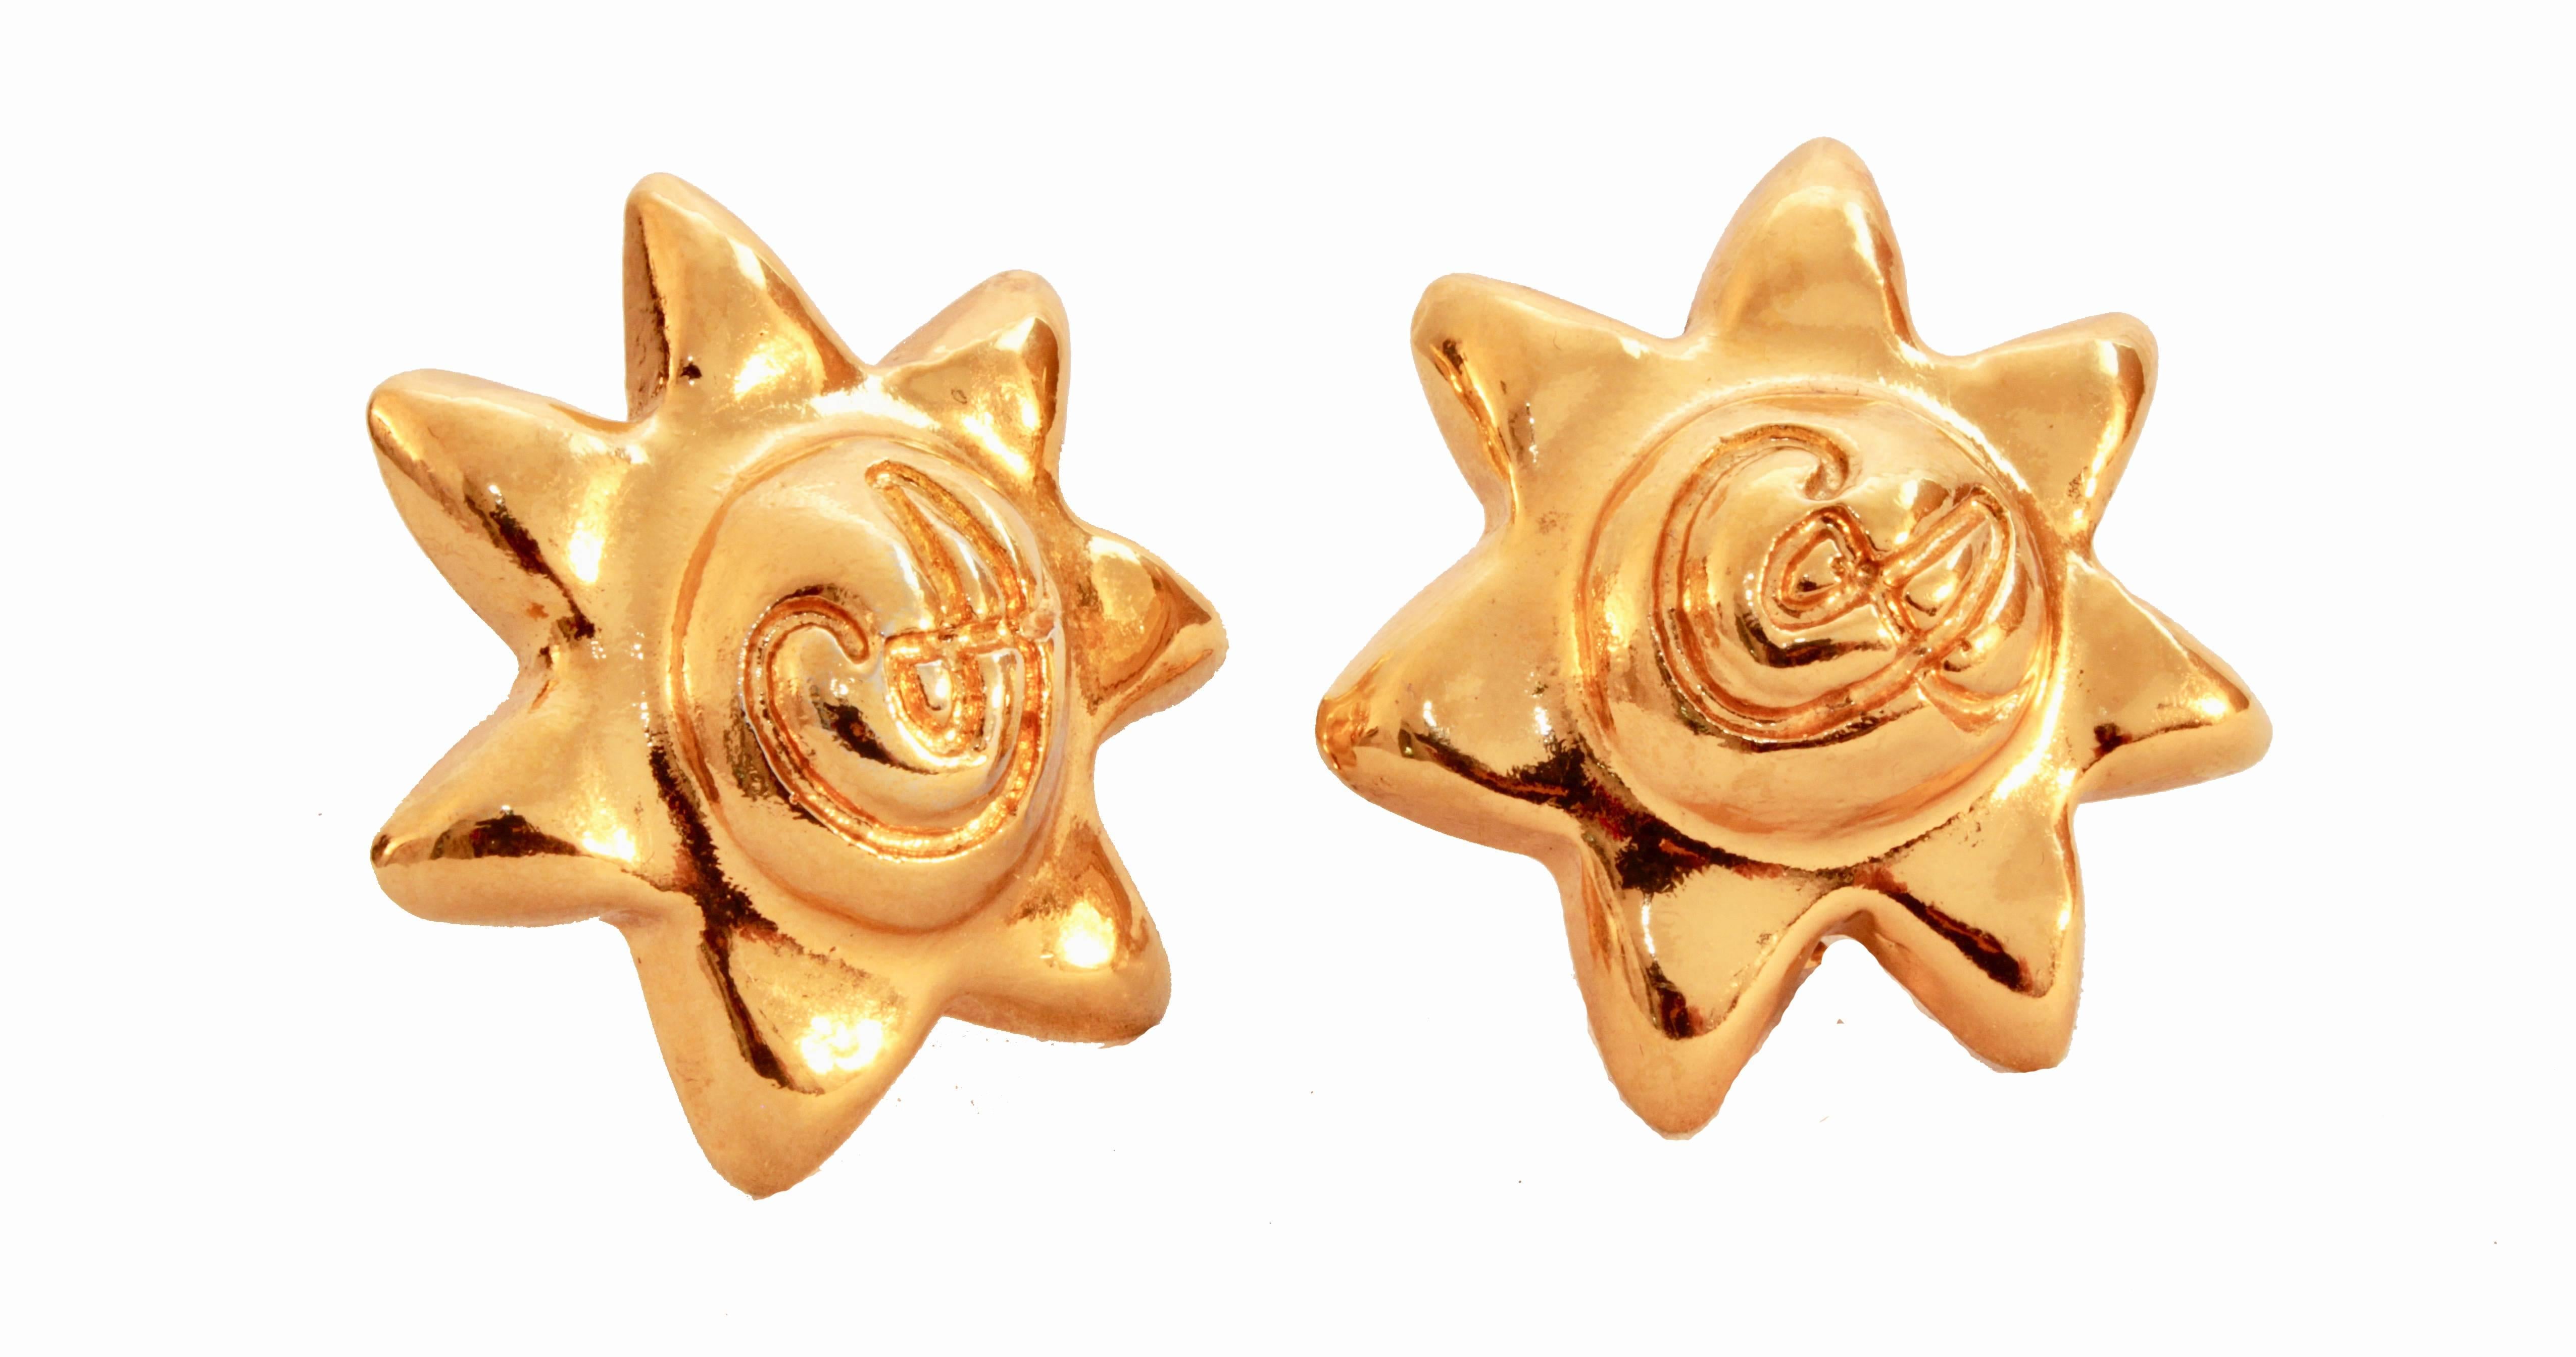 These chunky star earrings were made by Christian Lacroix, most likely in the early 1980s.  Made from a light weight gilt metal, they feature Lacroix's CL logo in front and fasten clip-style.  In excellent condition for their age, we note some color